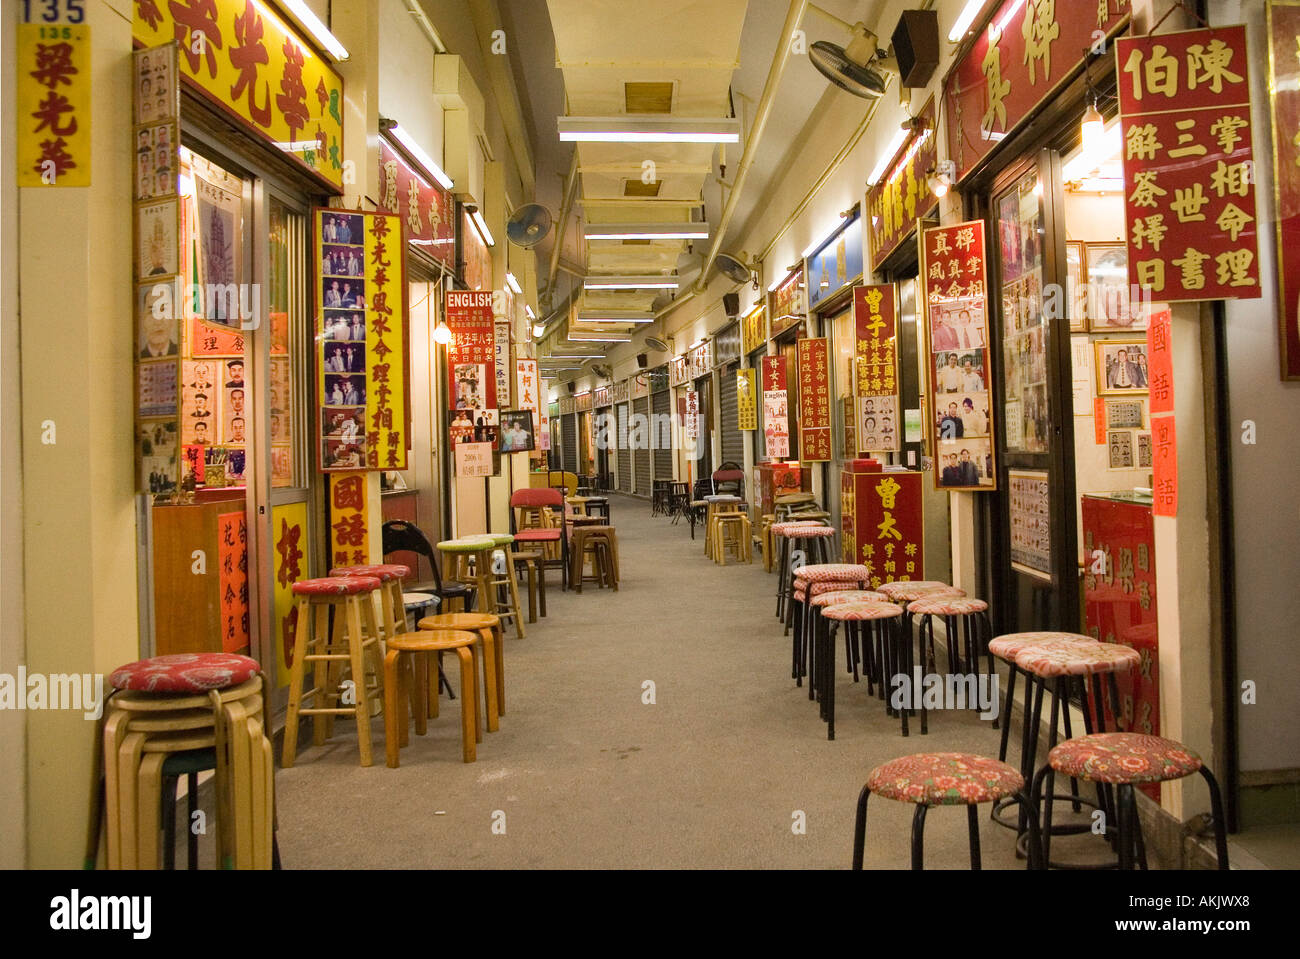 Long hallway with many storefronts in Hong Kong Stock Photo